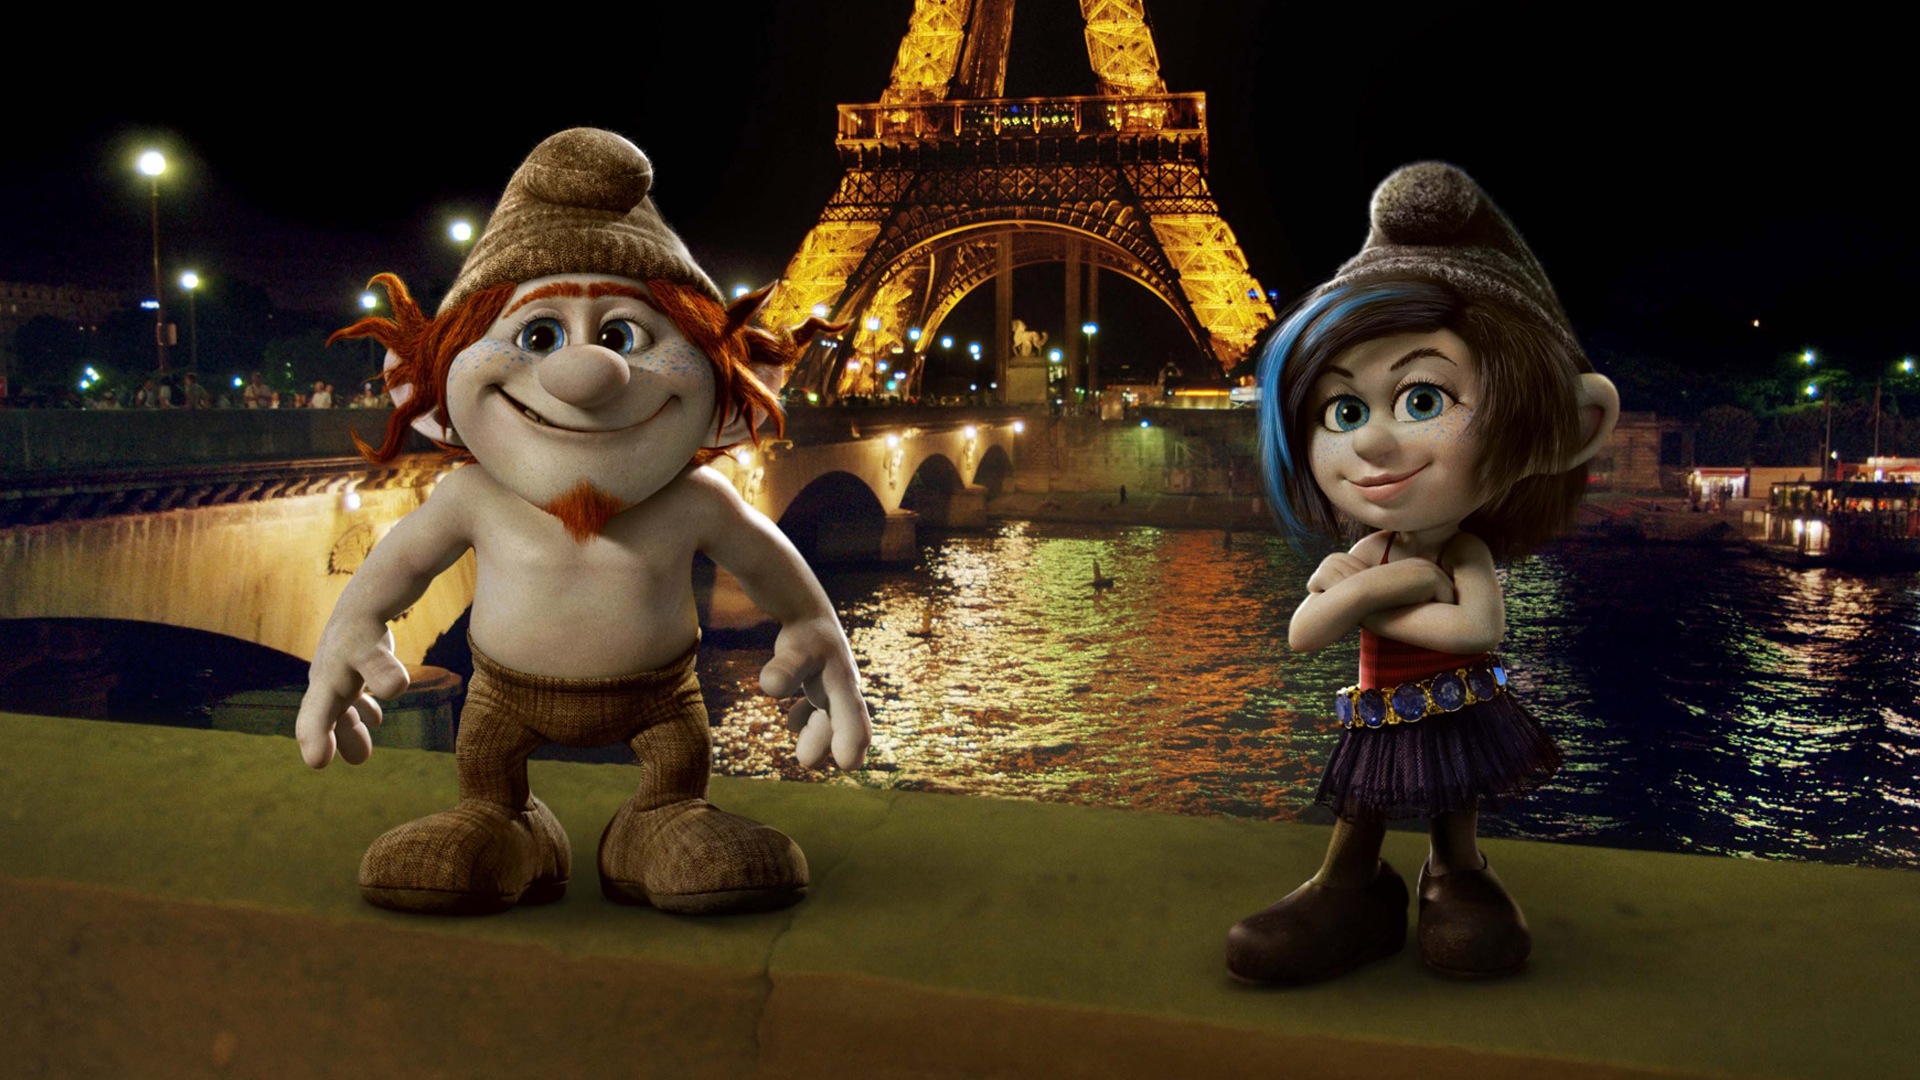 The Smurfs 2 HD movie wallpapers #6 - 1920x1080